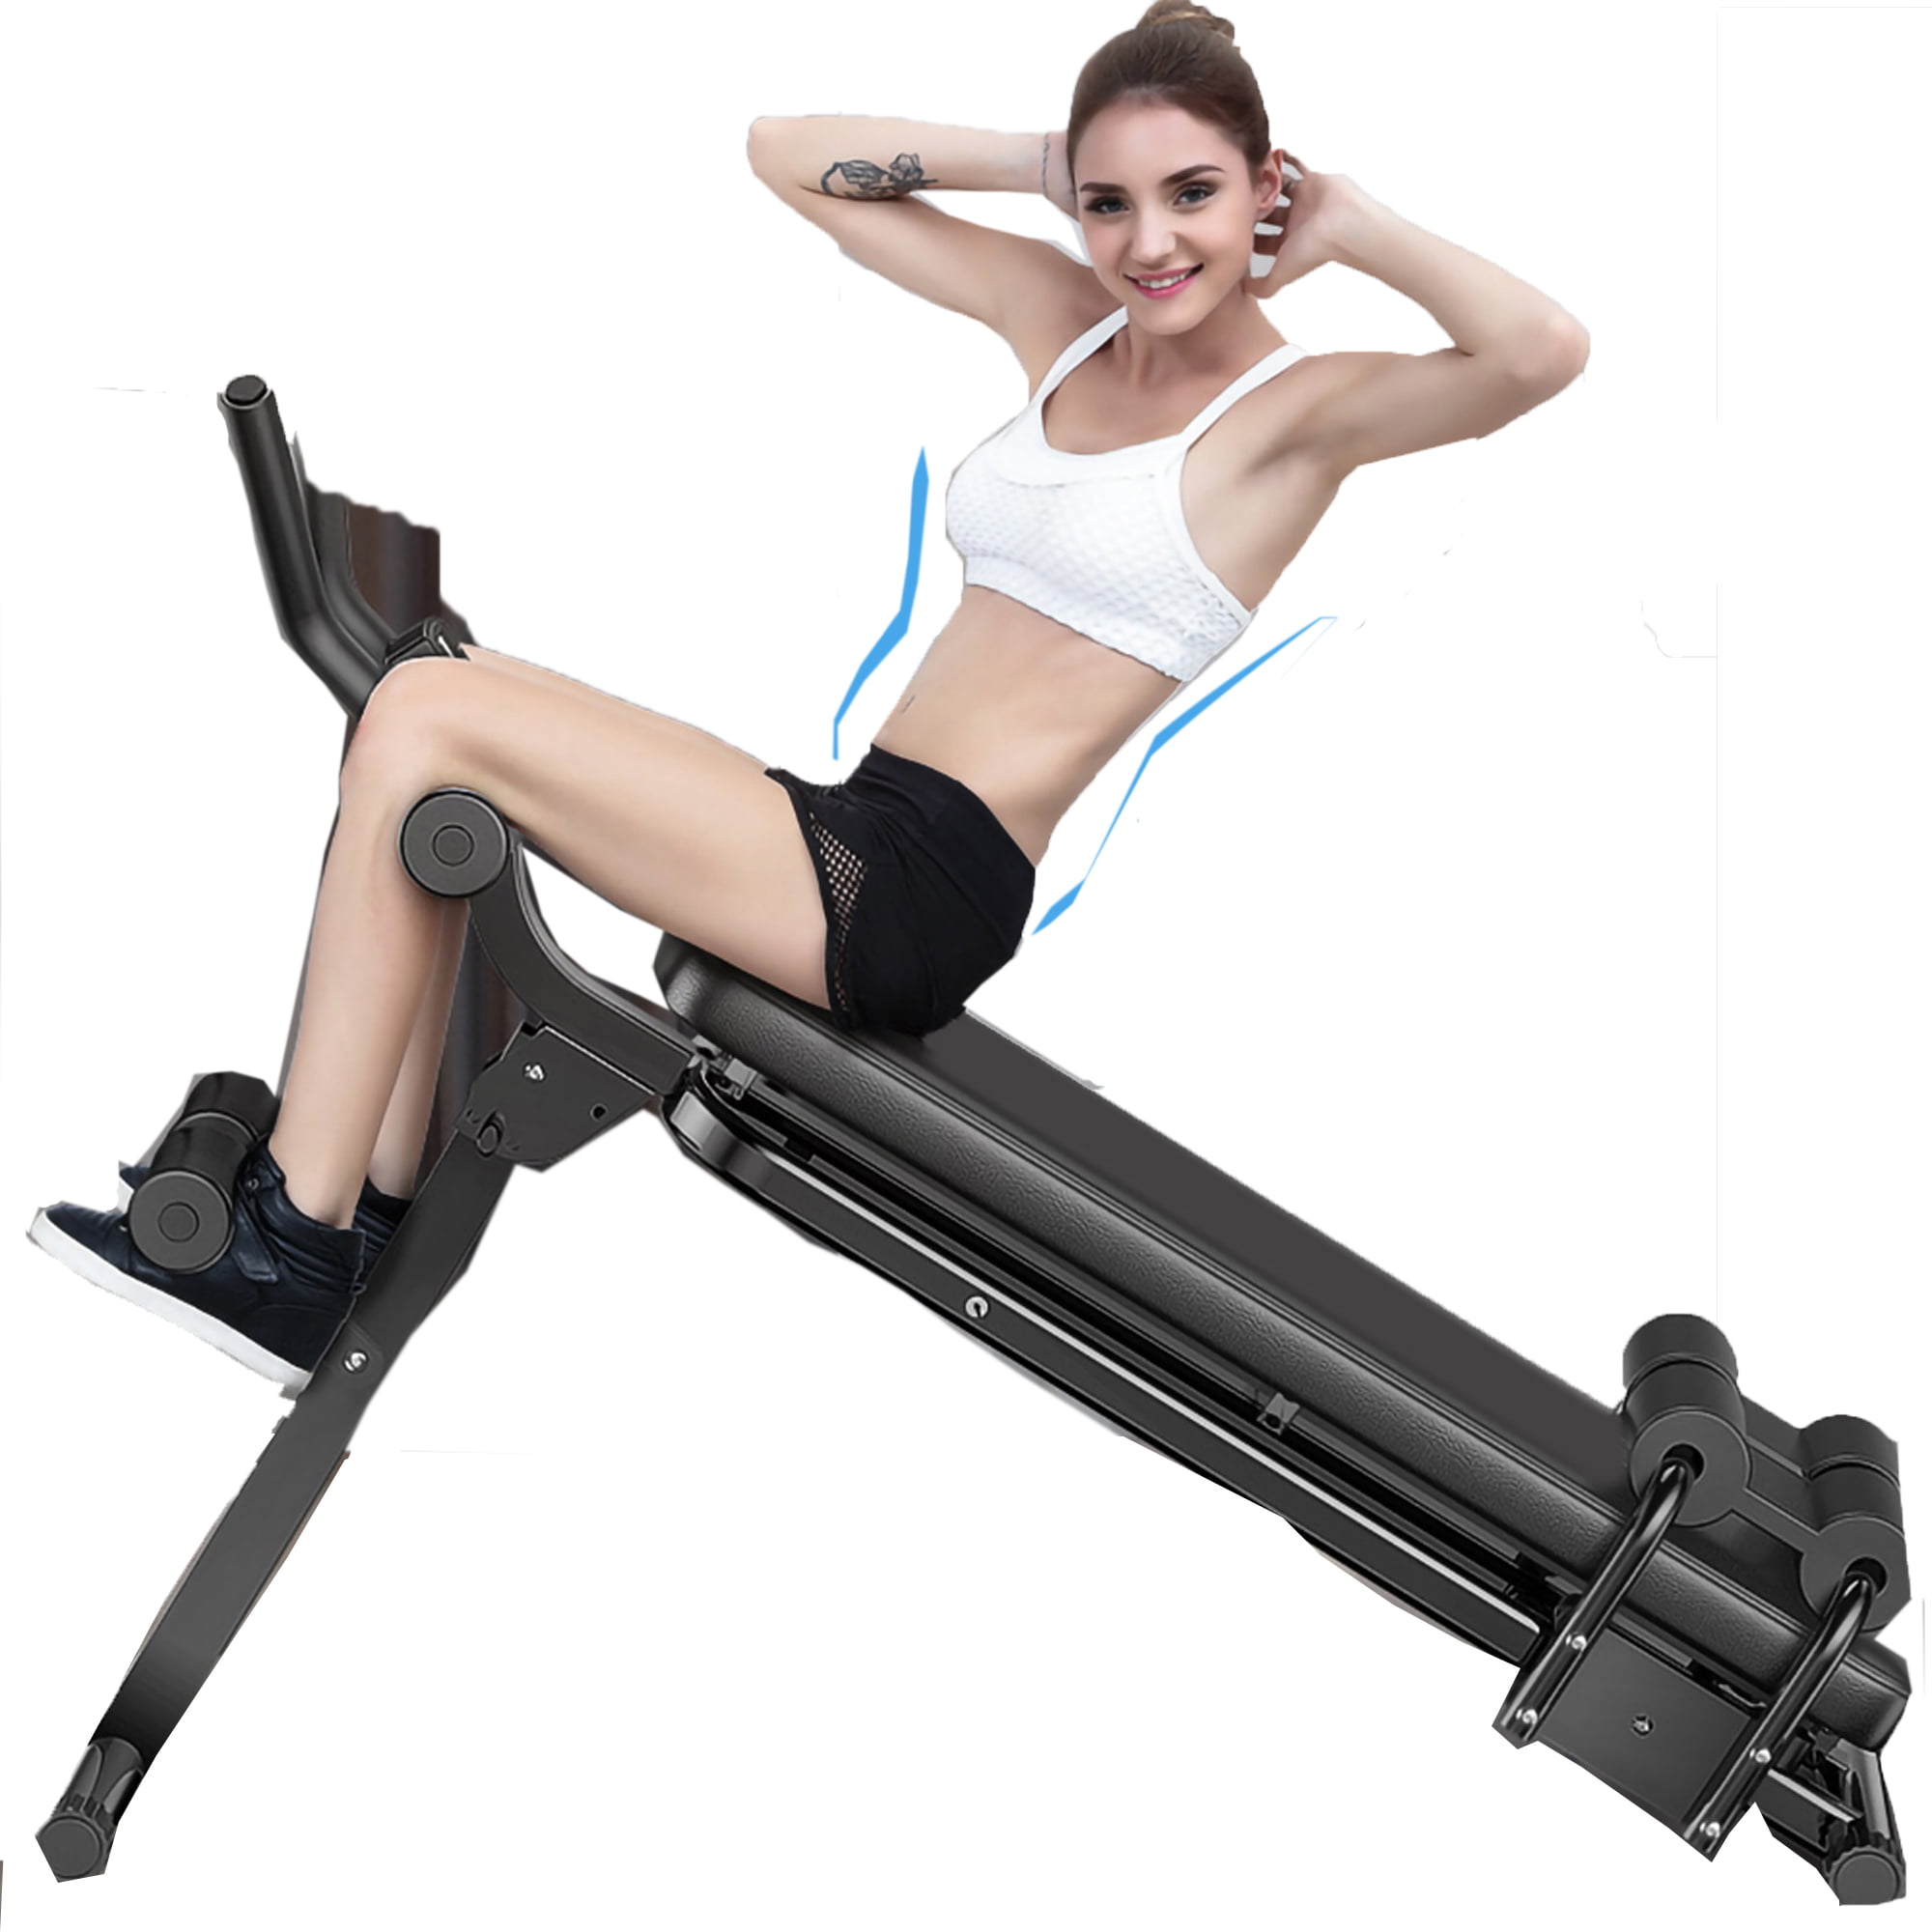 Details about   In Stock Sit Up Bench Decline Abdominal Fitness Home Gym Exercise Equipment 